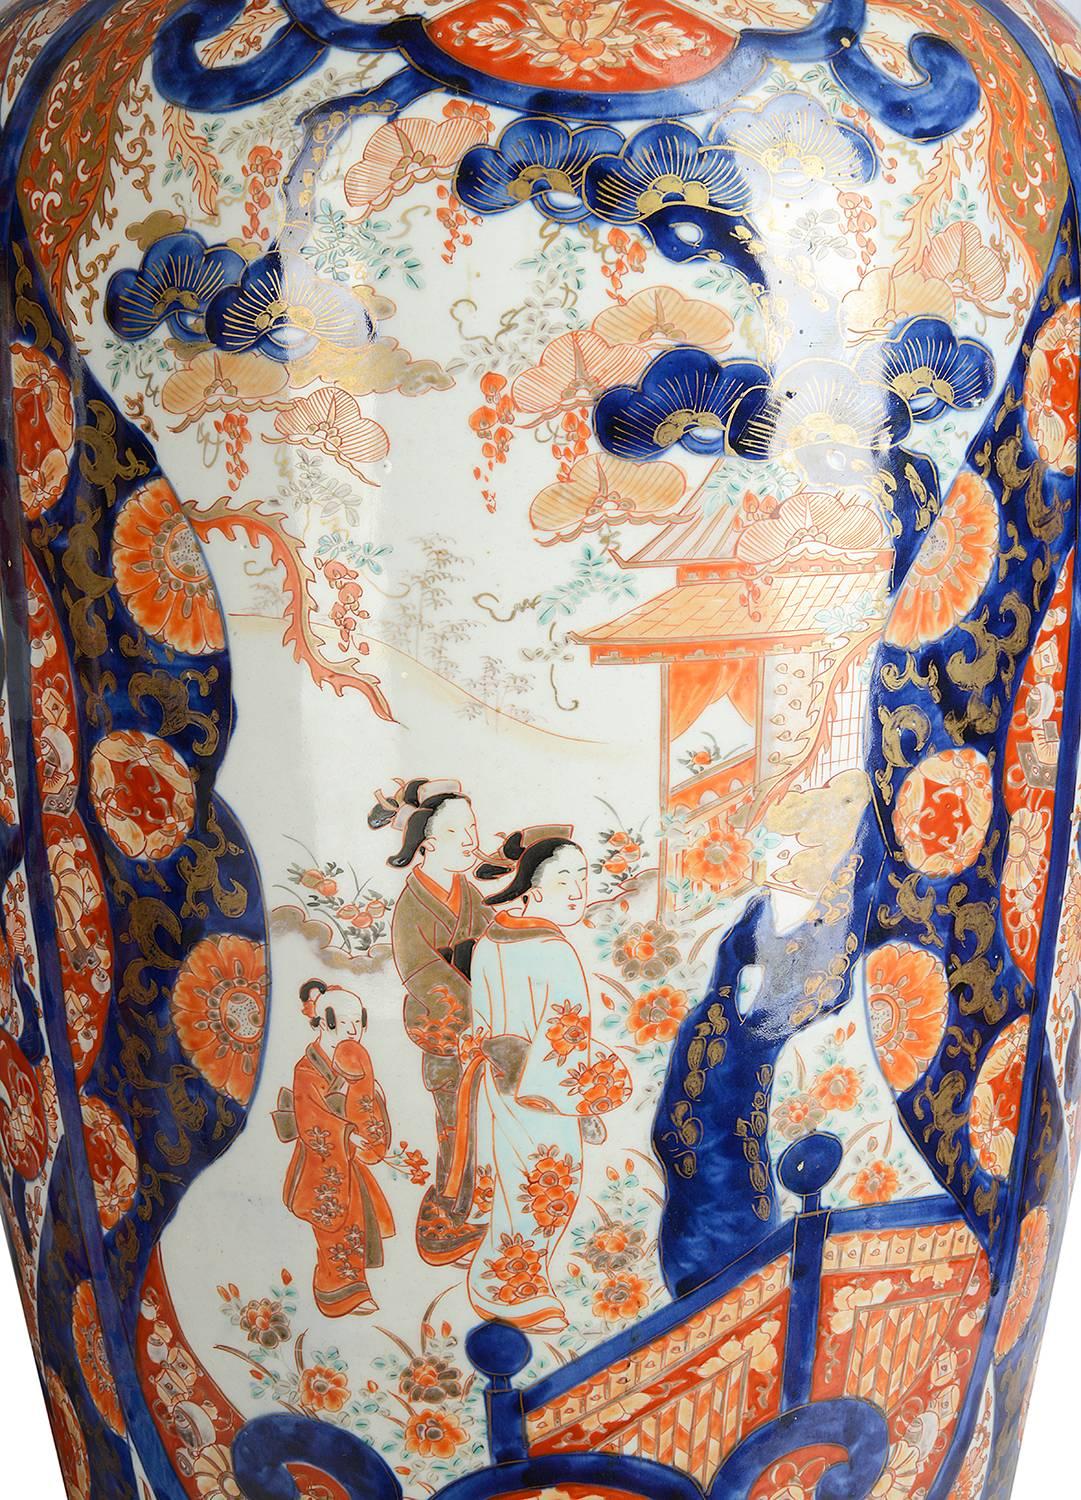 A large and impressive good quality pair of 19th century Japanese Imari vases, each having classical motifs, flowers and scrolls to the ground and inset painted panels depicting women and children in the gardens.